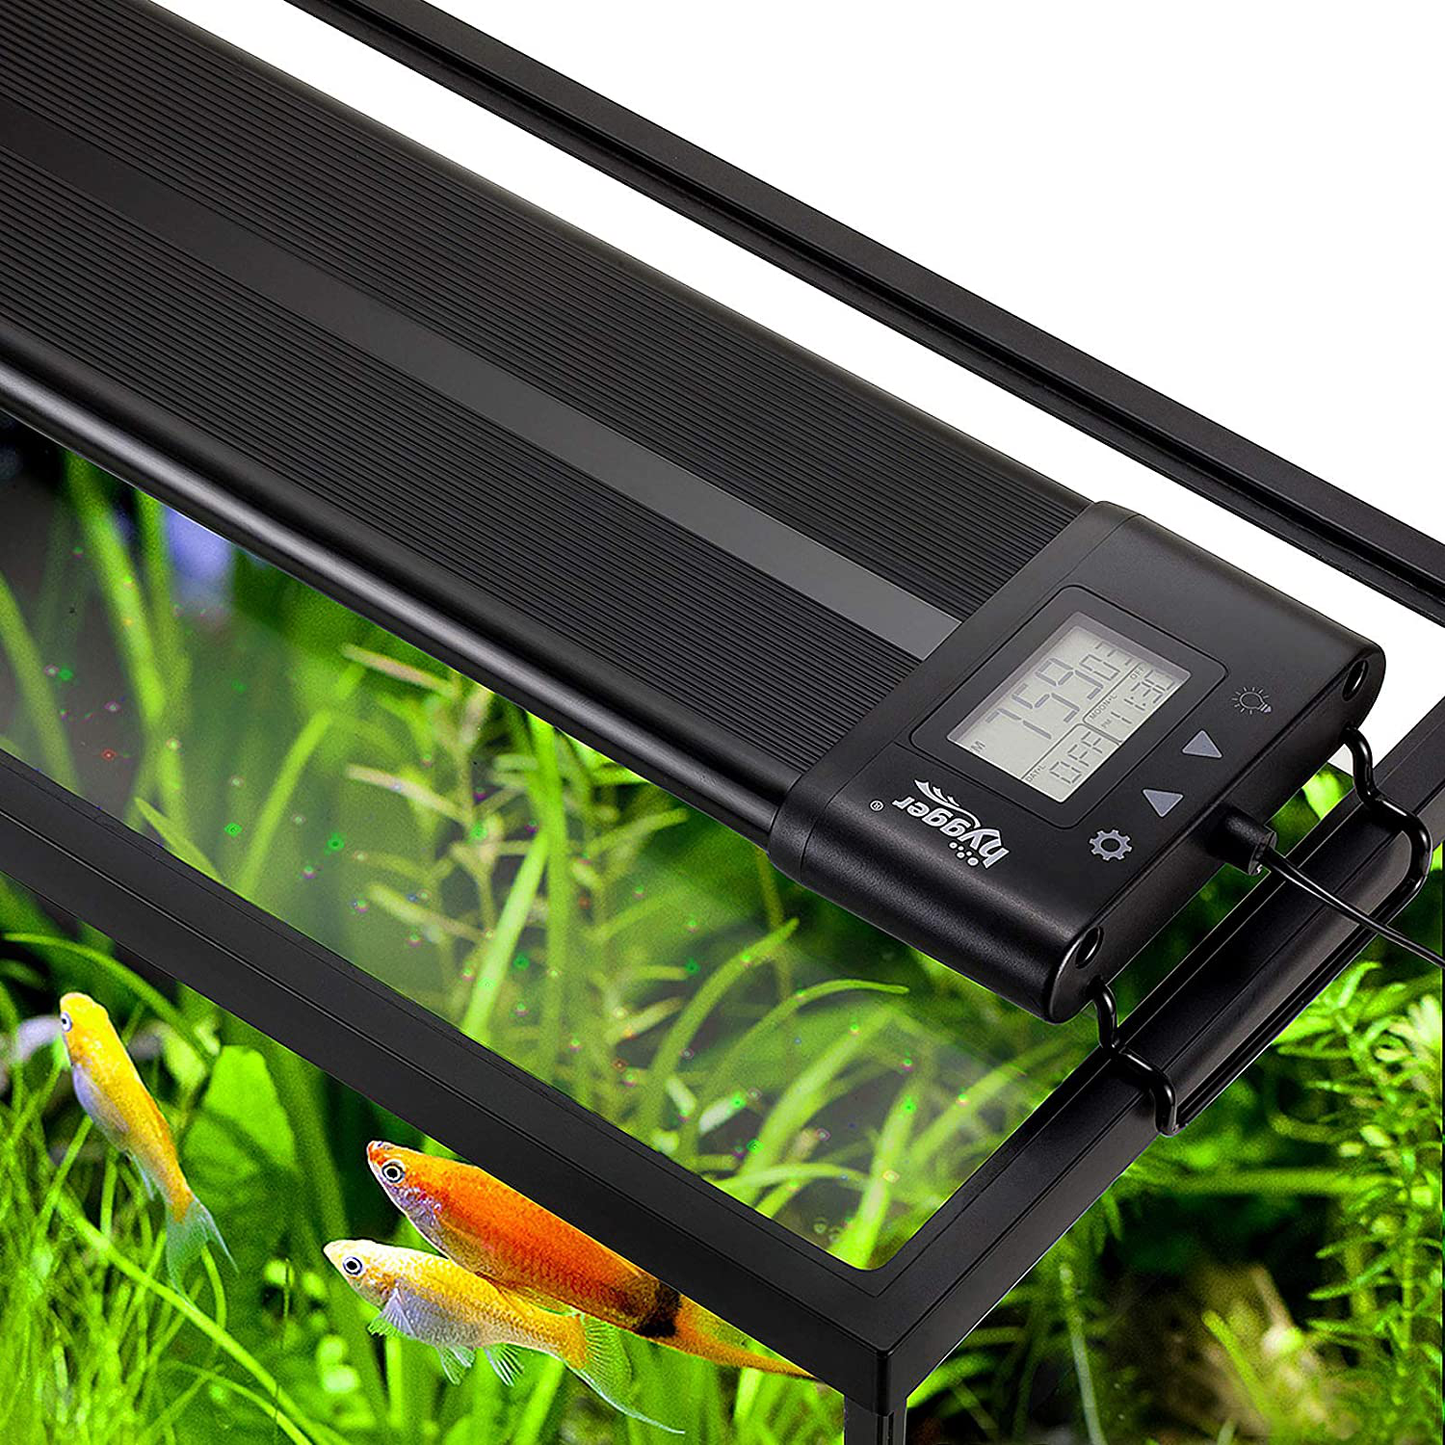 Hygger Auto on off 18-24 Inch LED Aquarium Light Extendable Dimable 7 Colors Full Spectrum Light Fixture for Freshwater Planted Tank Build in Timer Sunrise Sunset